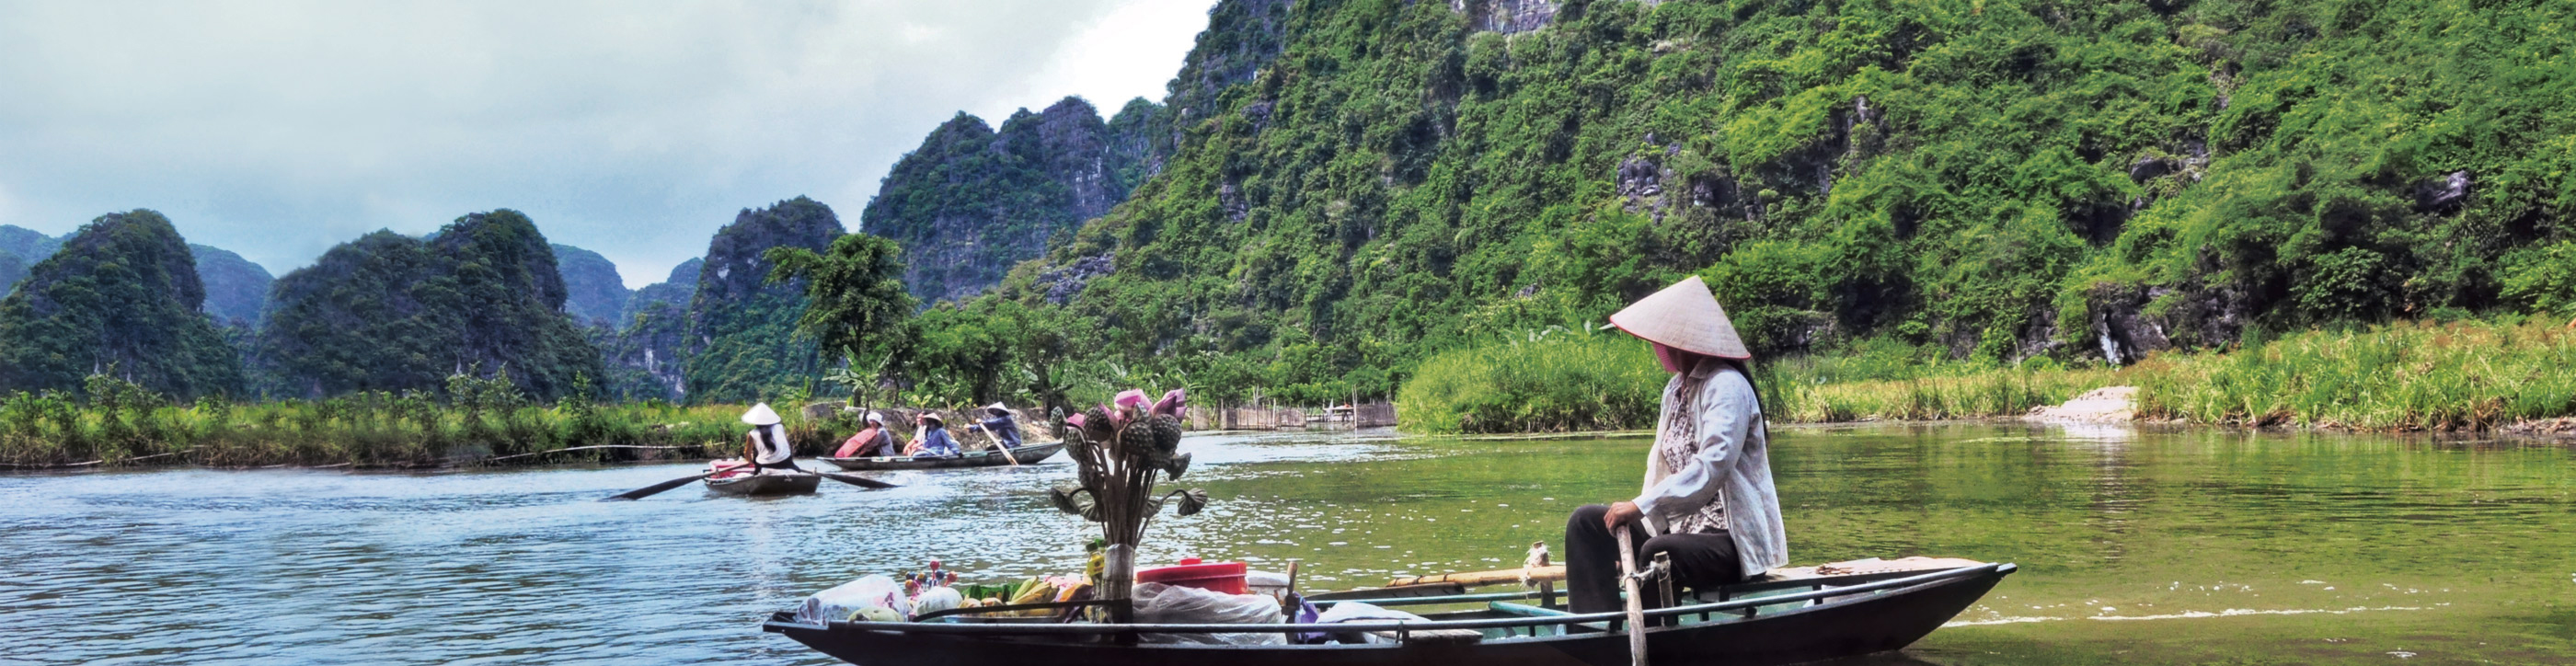 Photograph of Timeless Wonders of Vietnam, Cambodia & the Mekong